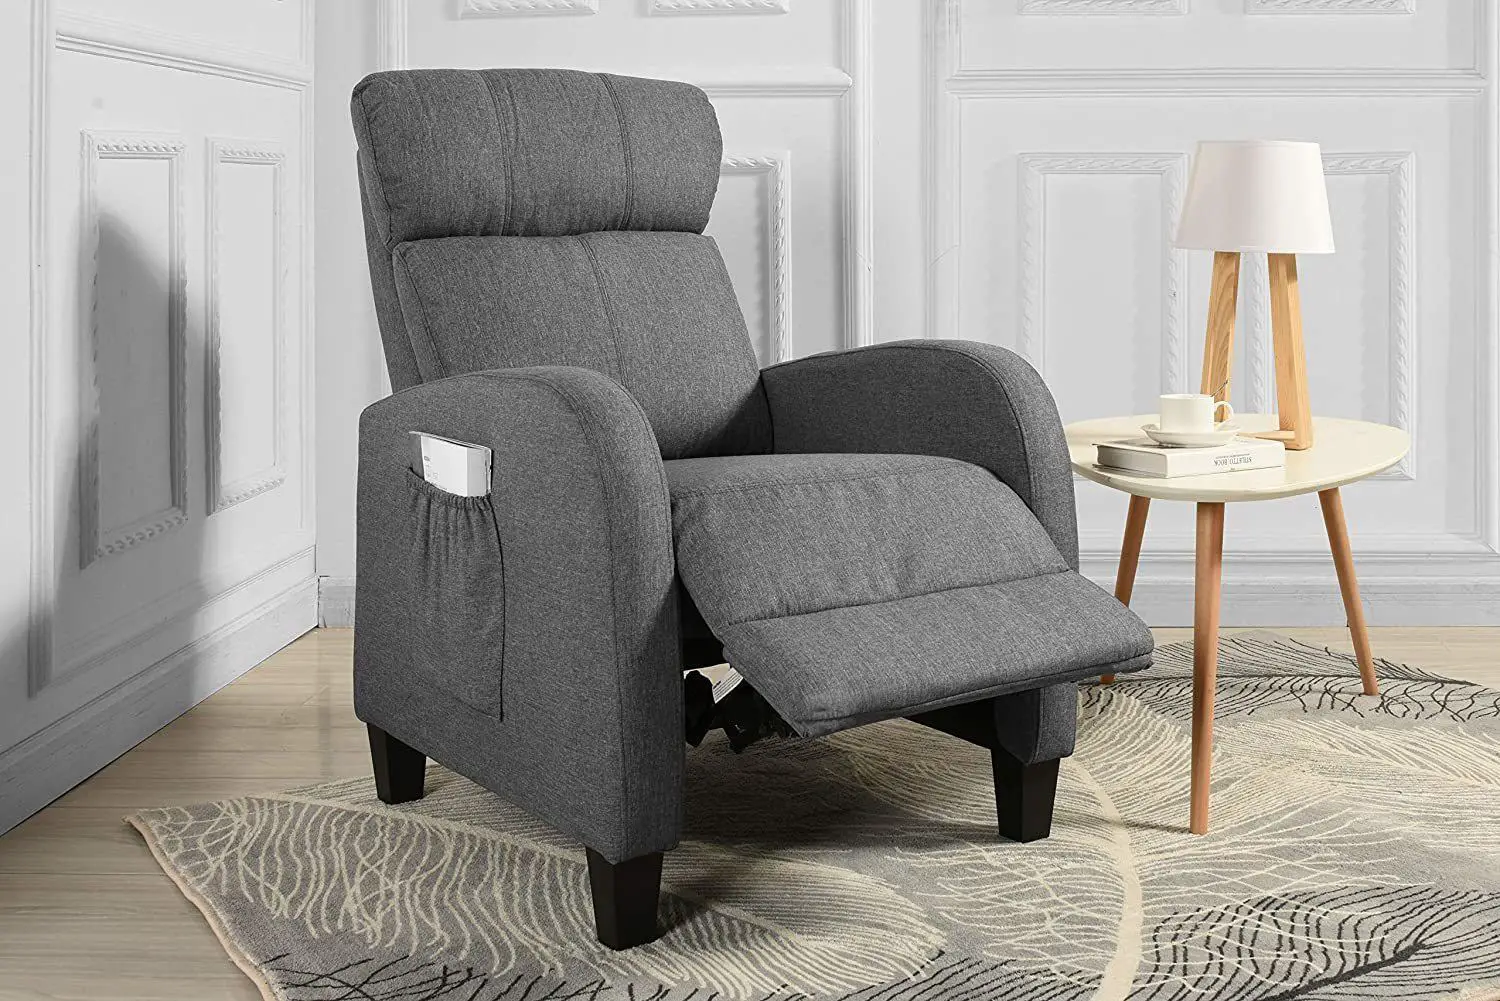 Best Living Room Chairs For Ba